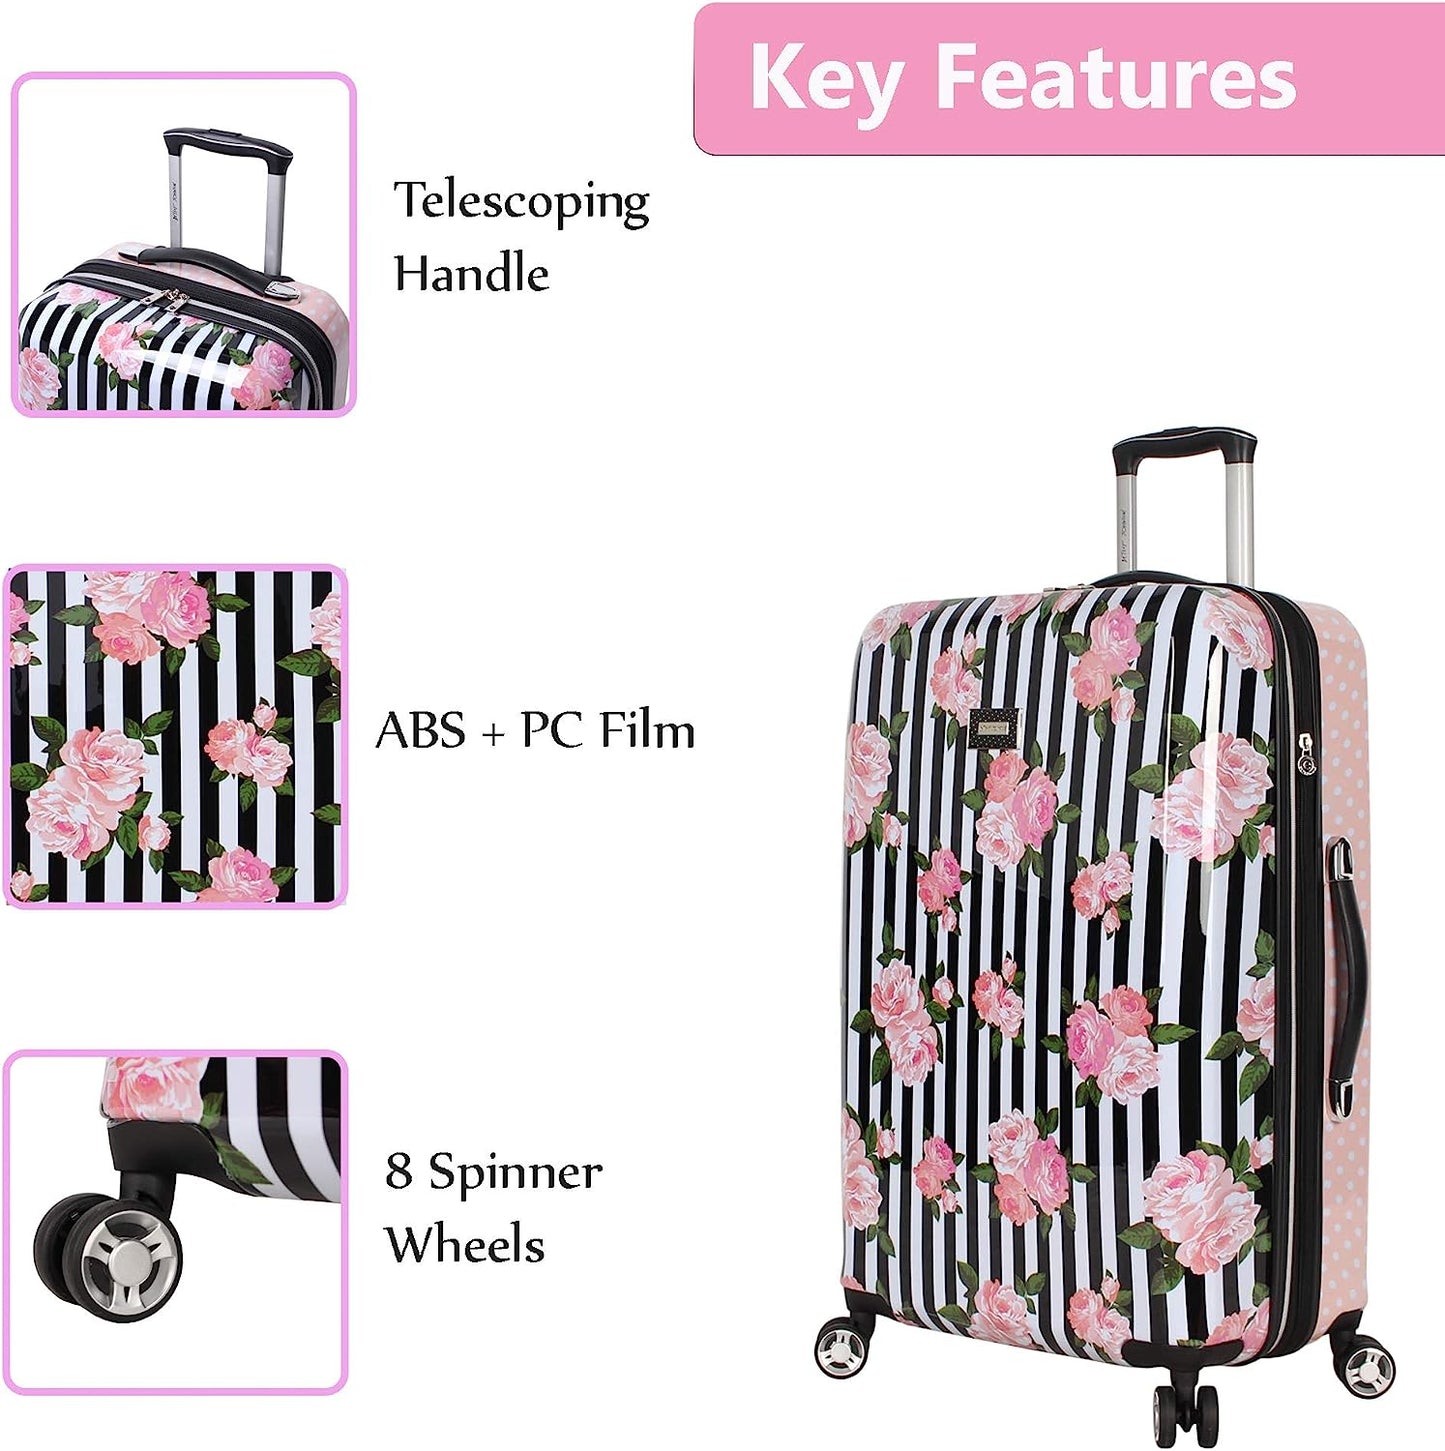 26 Inch Checked Luggage Collection - Expandable Scratch Resistant (ABS + PC) Hardside Suitcase - Designer Lightweight Bag with 8-Rolling Spinner Wheels (Stripe Roses)